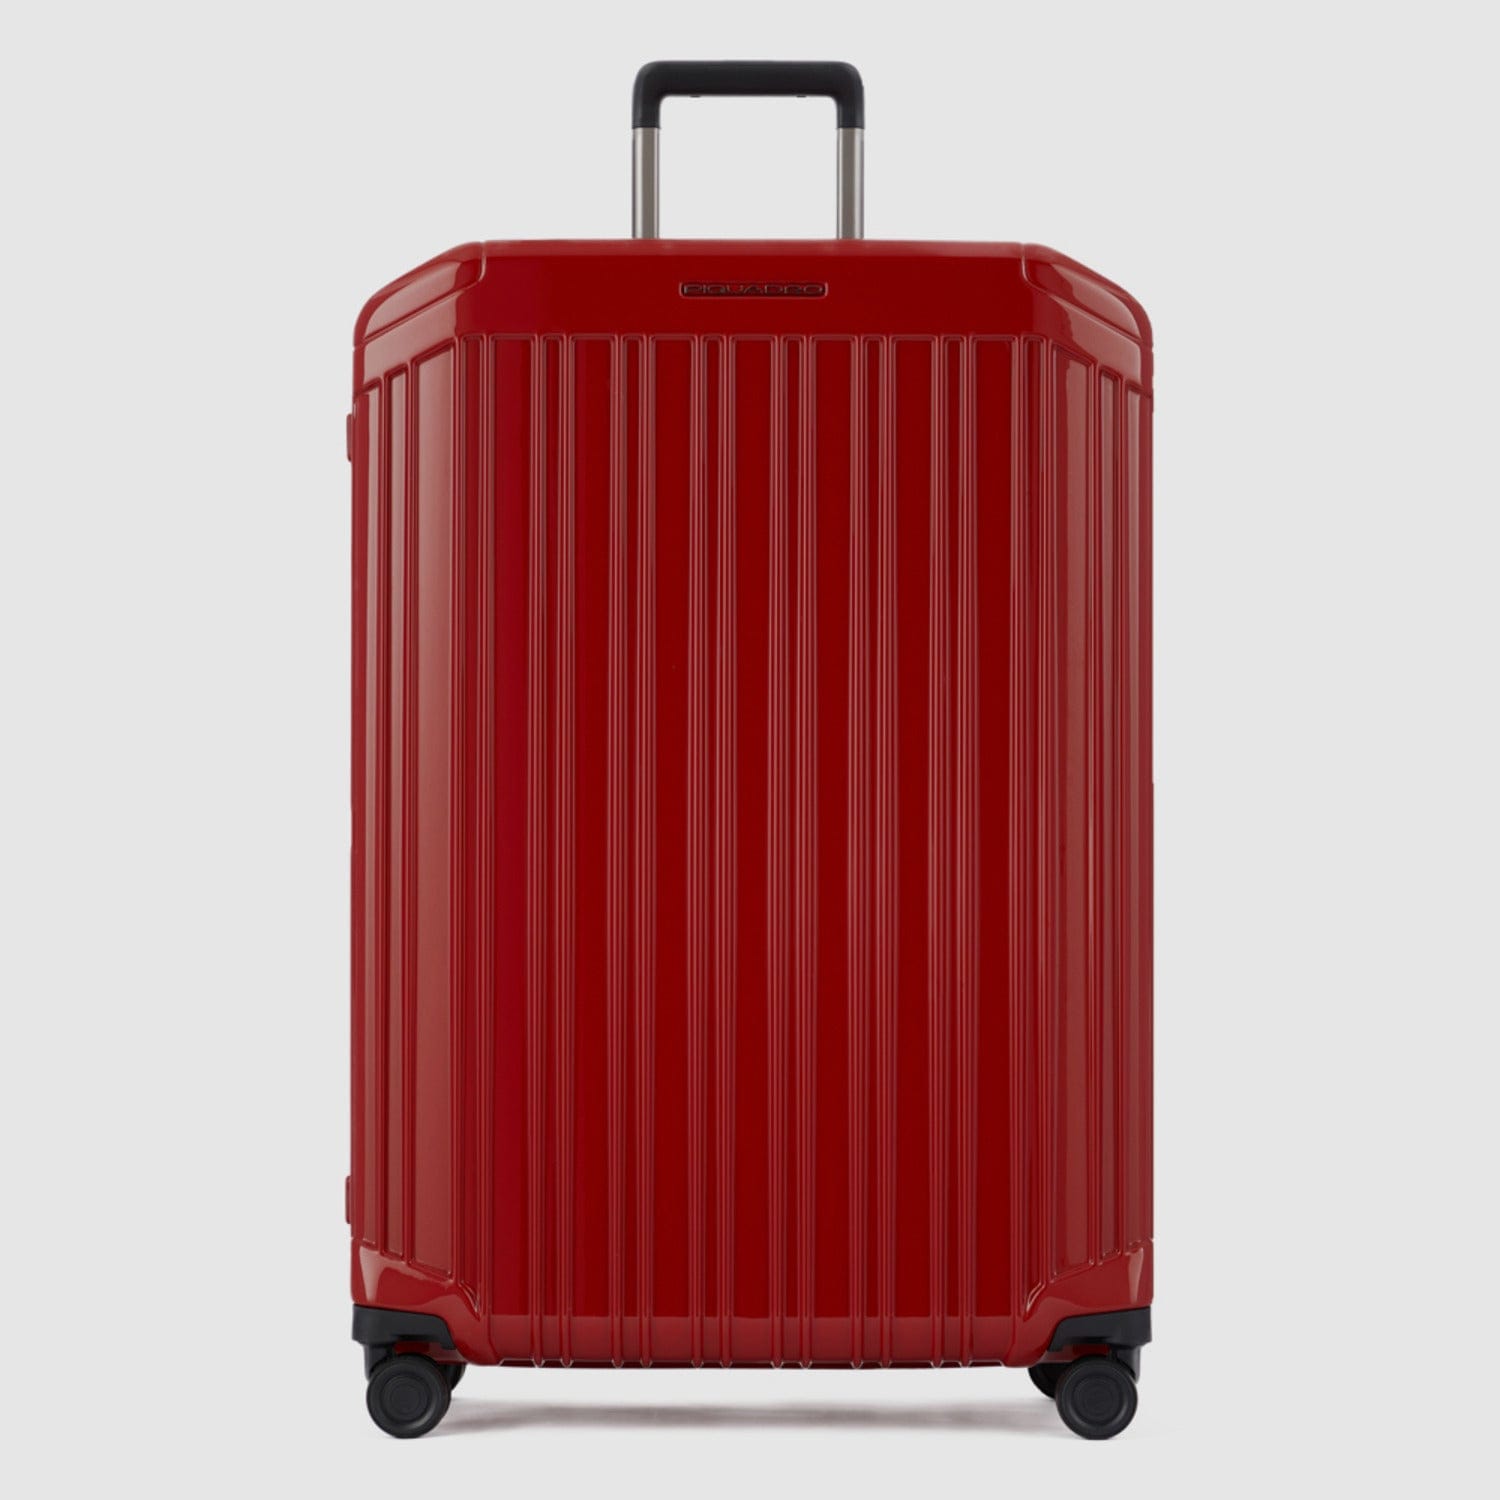 Piquadro PQ-LIGHT 75cm Hardcase 4 Double Wheel Large Check-In Trolley Red - BV4428PQL/R